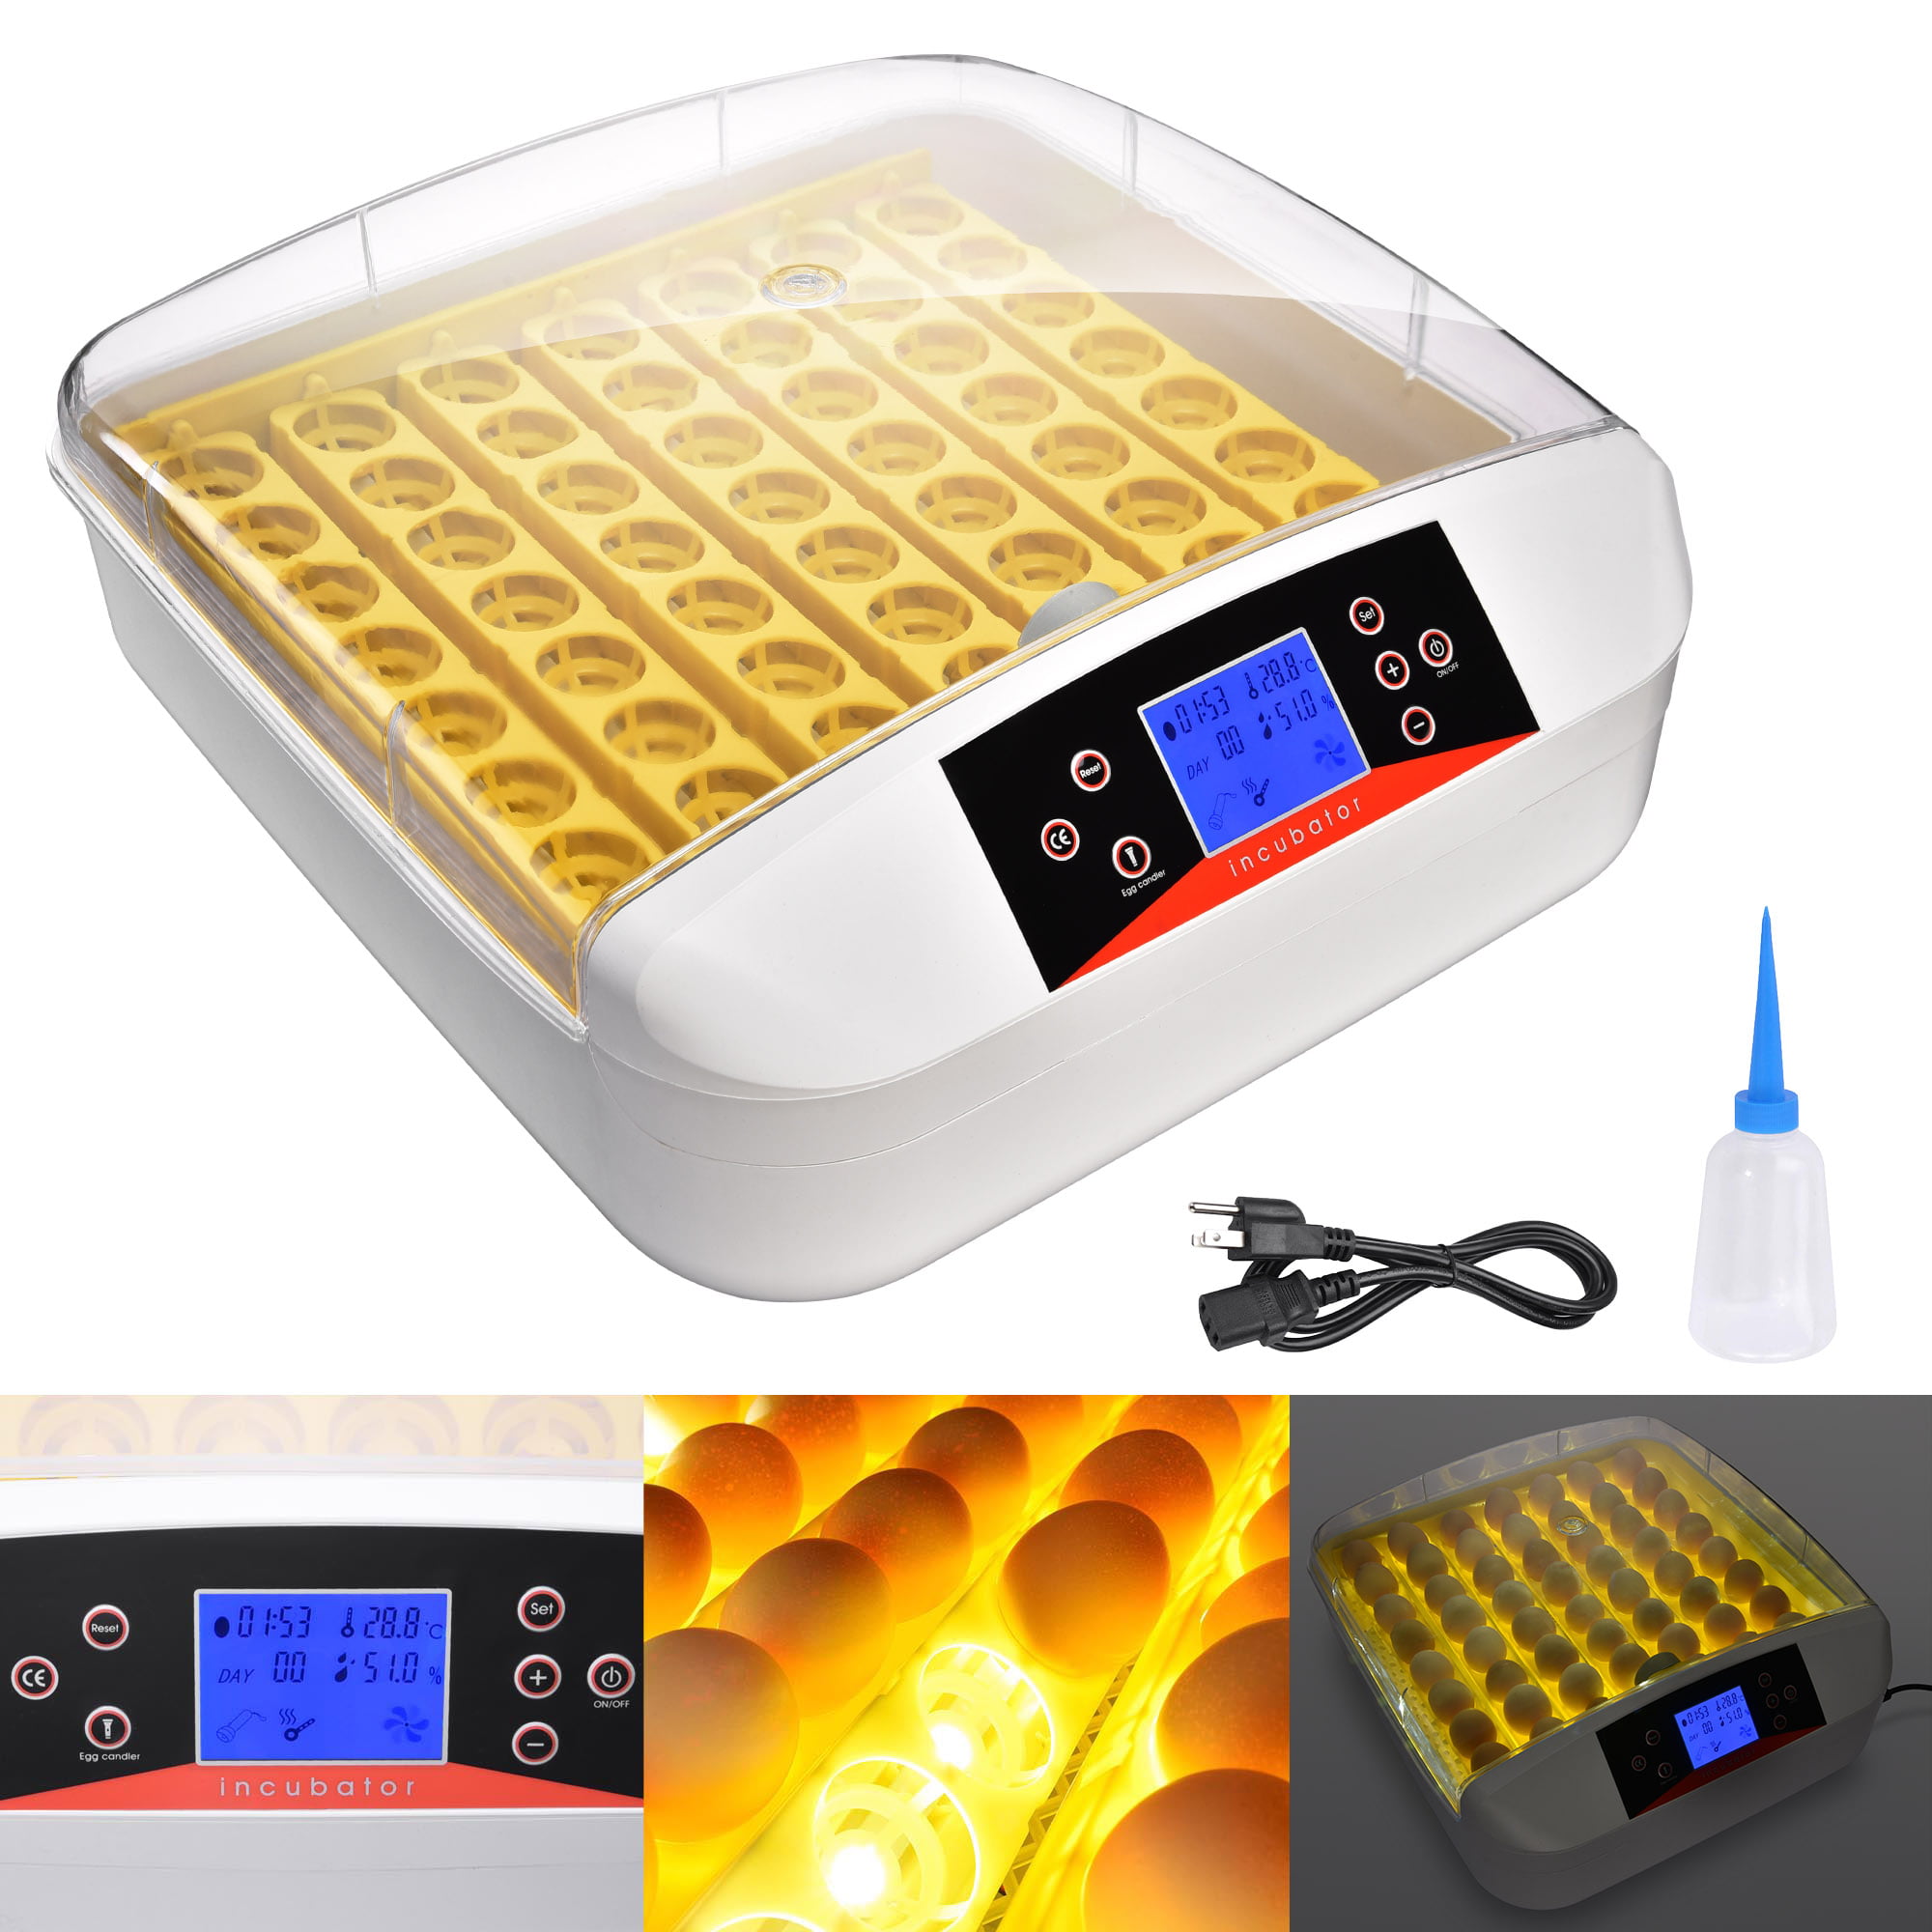 Yescom Digital 56 Egg Incubator Hatcher Temperature Control Automatic Turning with Built-in LED Candler